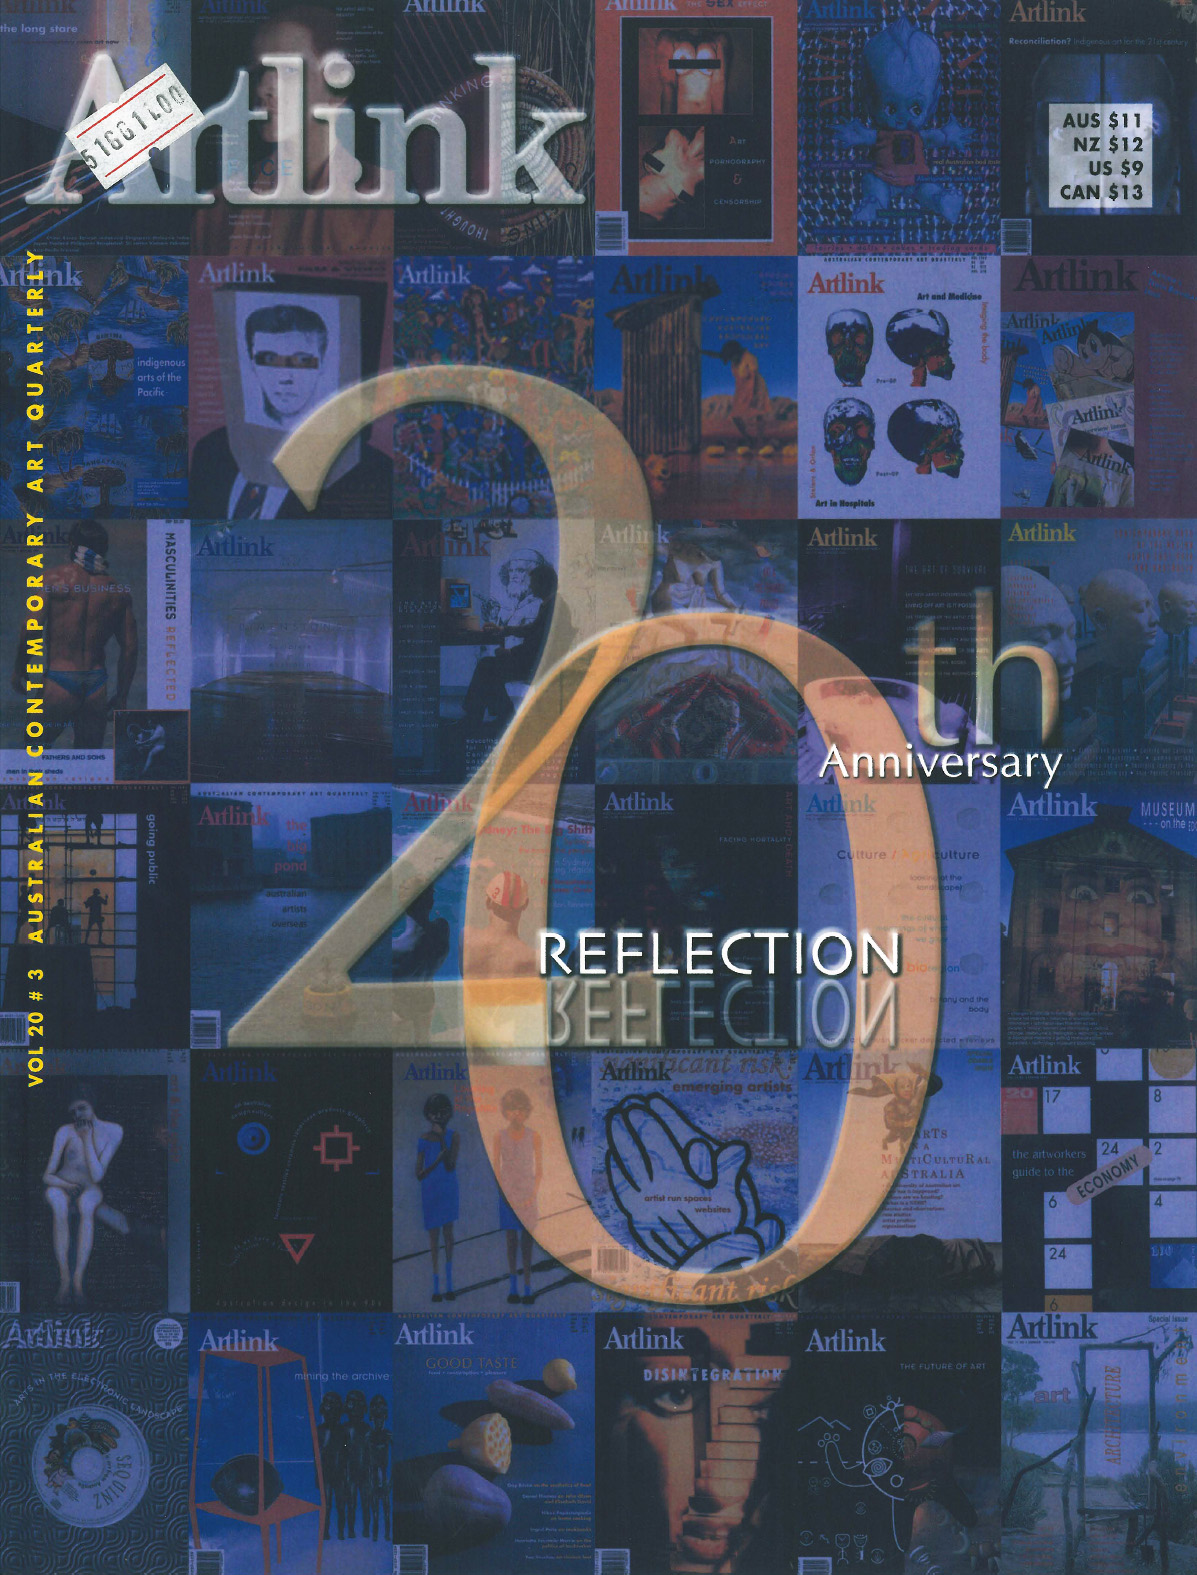 Issue 20:3 | September 2000 | Reflection: 20th Anniversary Issue